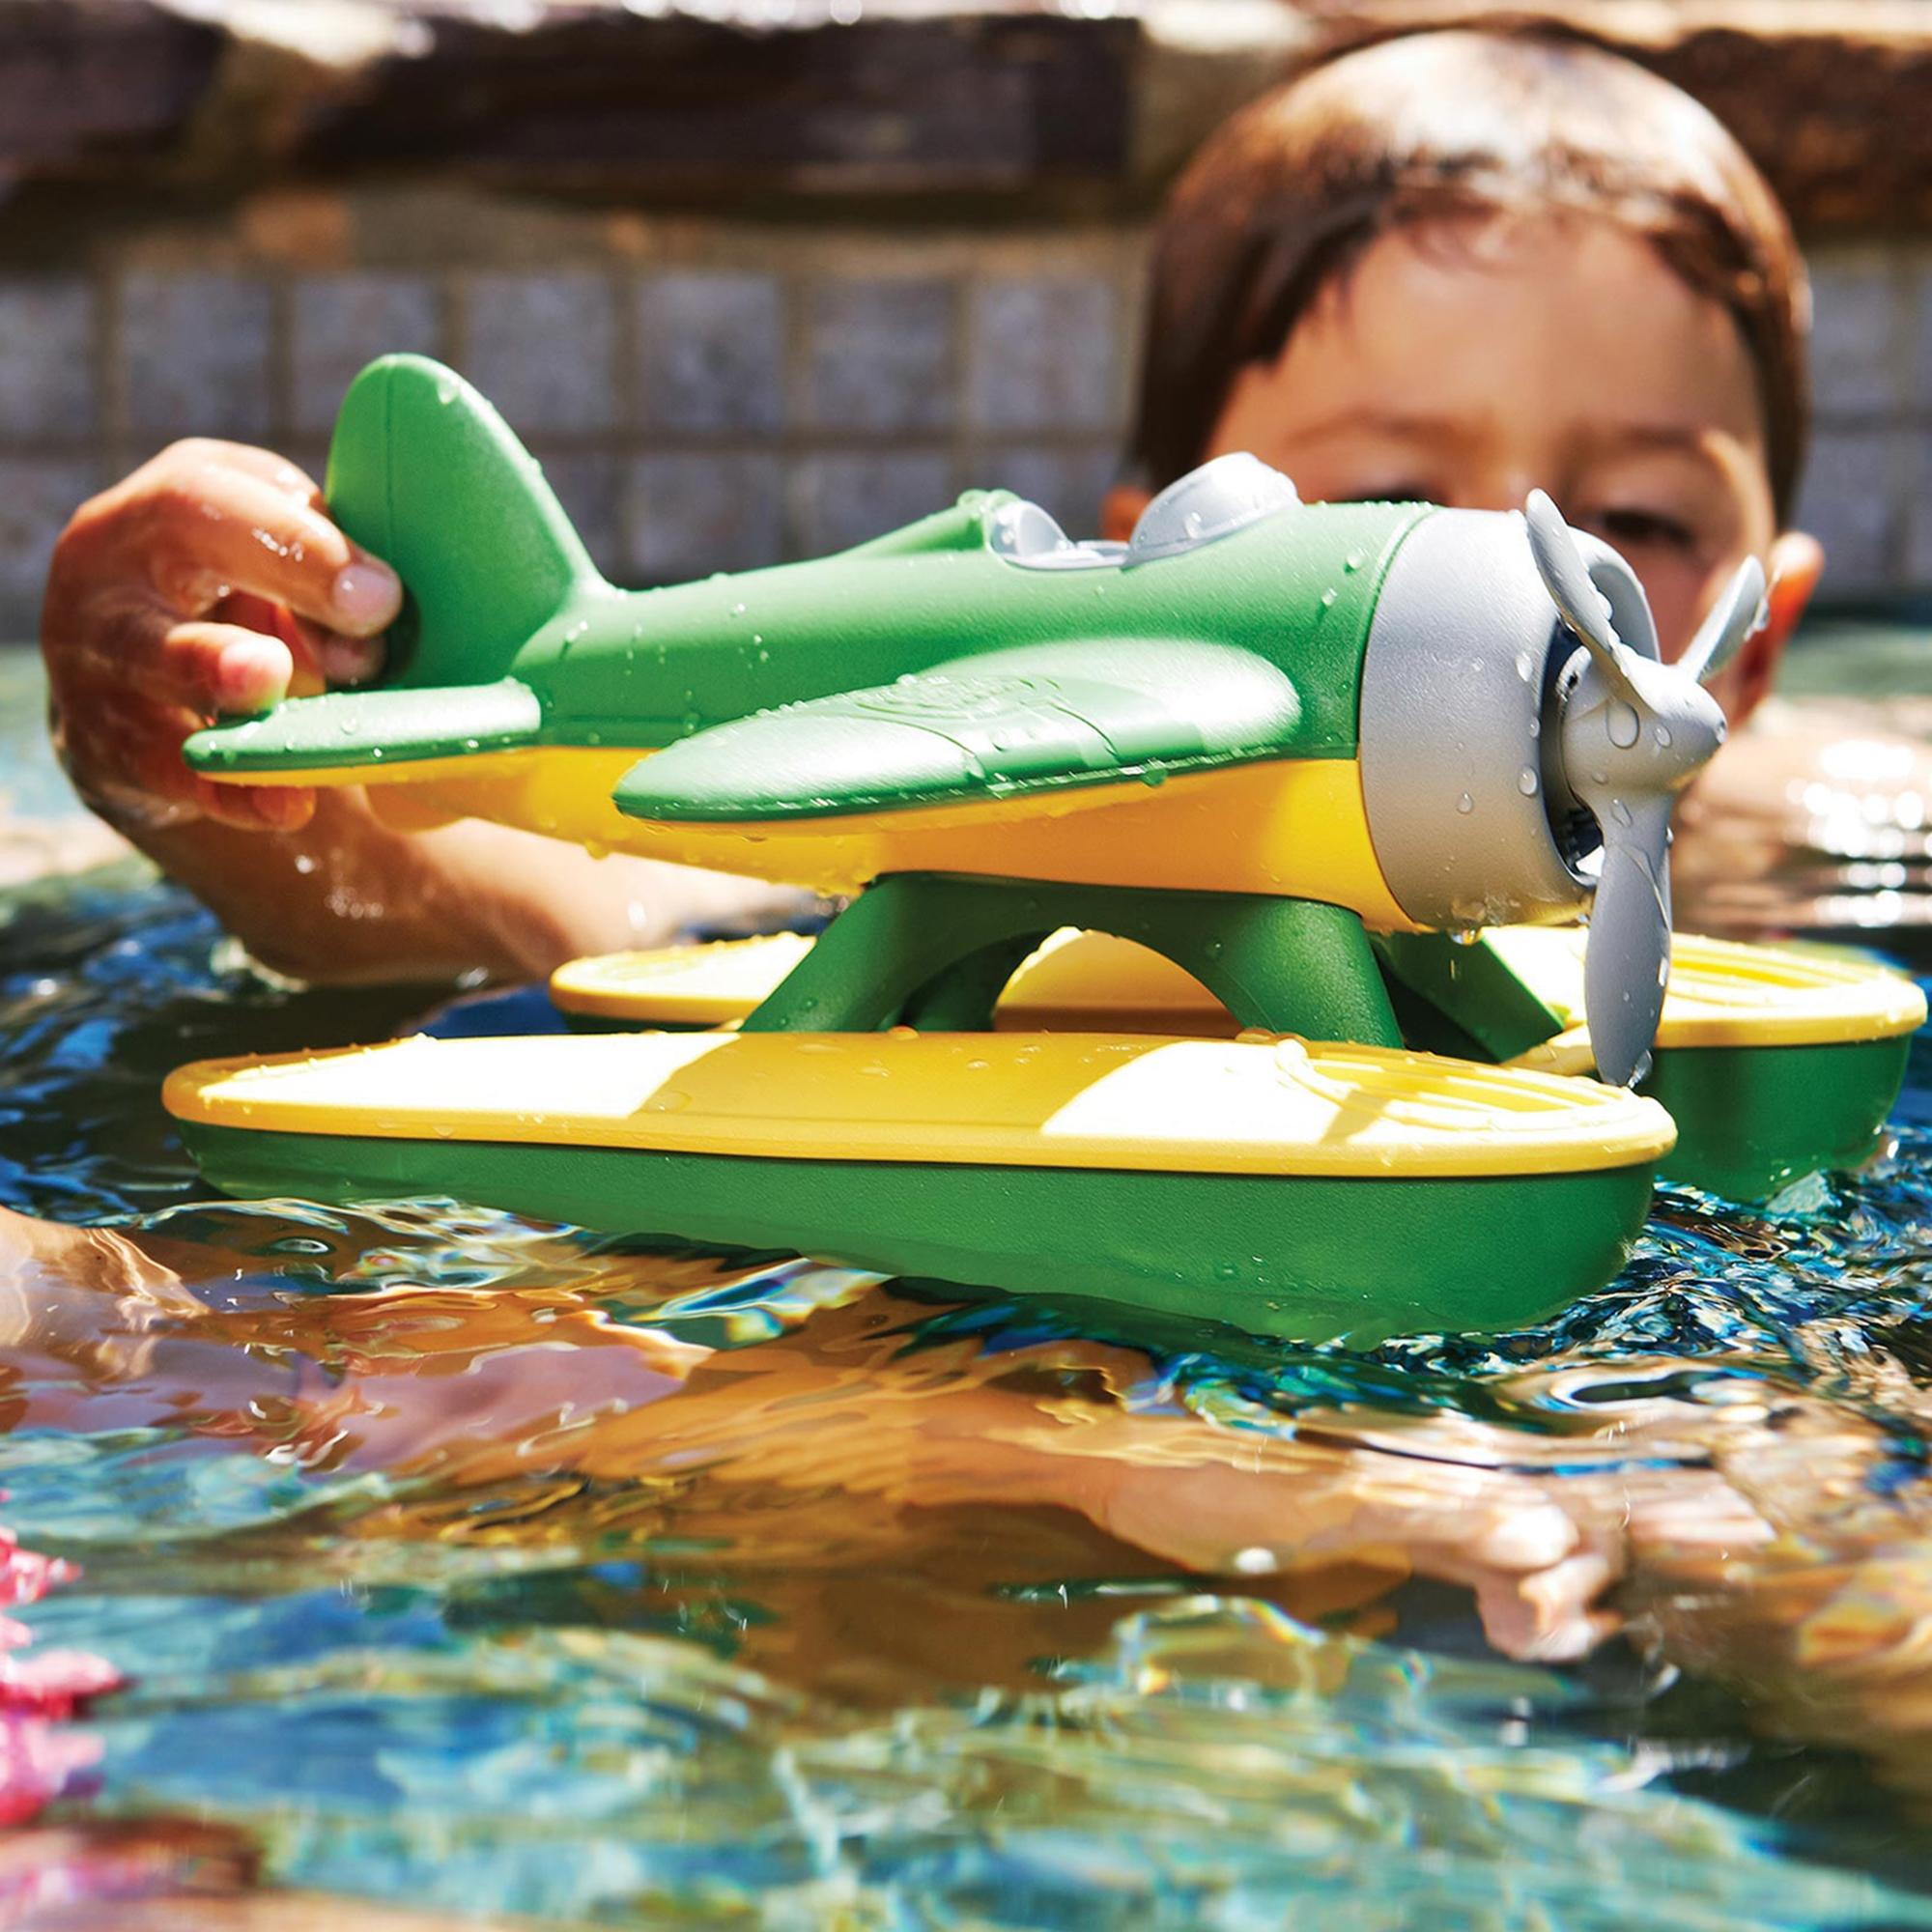 Boy playing with green and yellow seaplane as it floats on water.